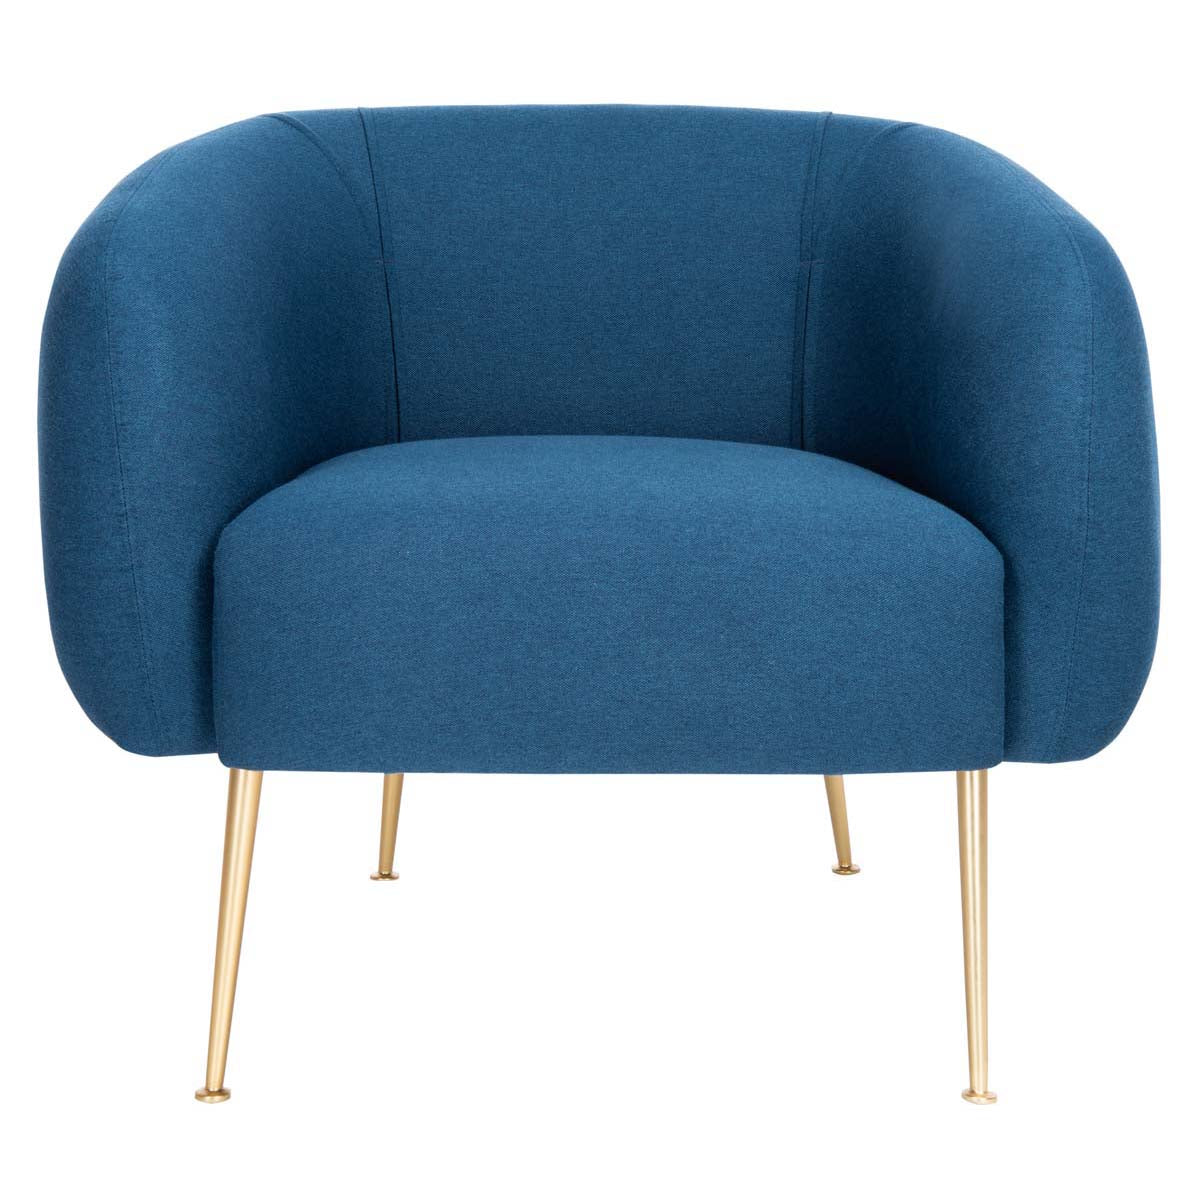 Safavieh Couture Alena Accent Chair - Navy